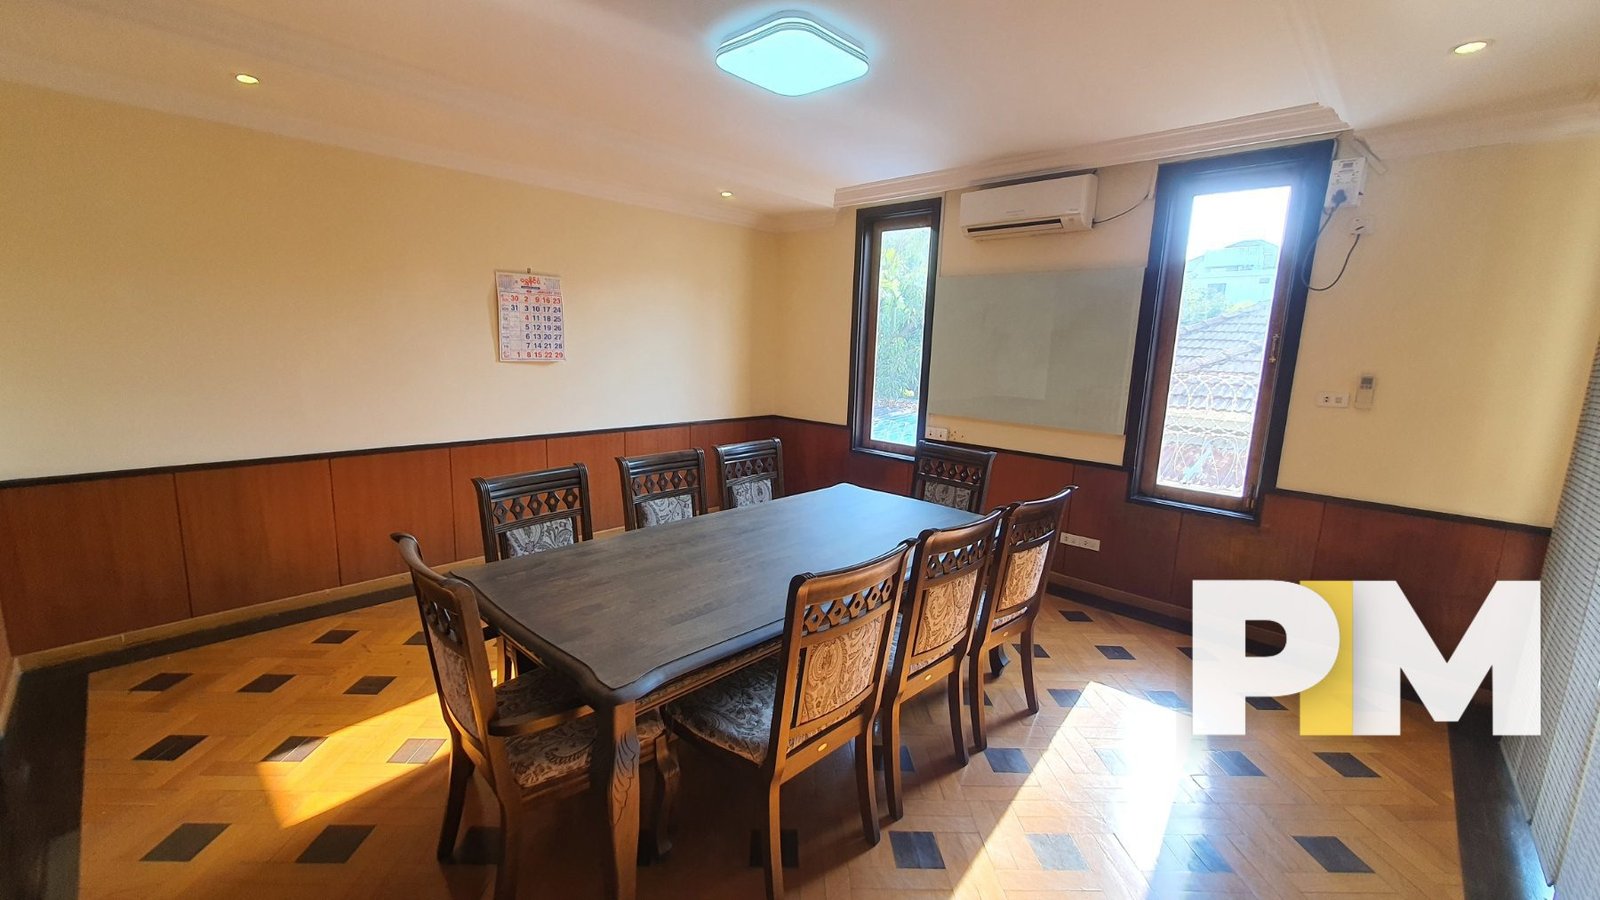 Dining Room with table and chairs - Yangon Real Estate